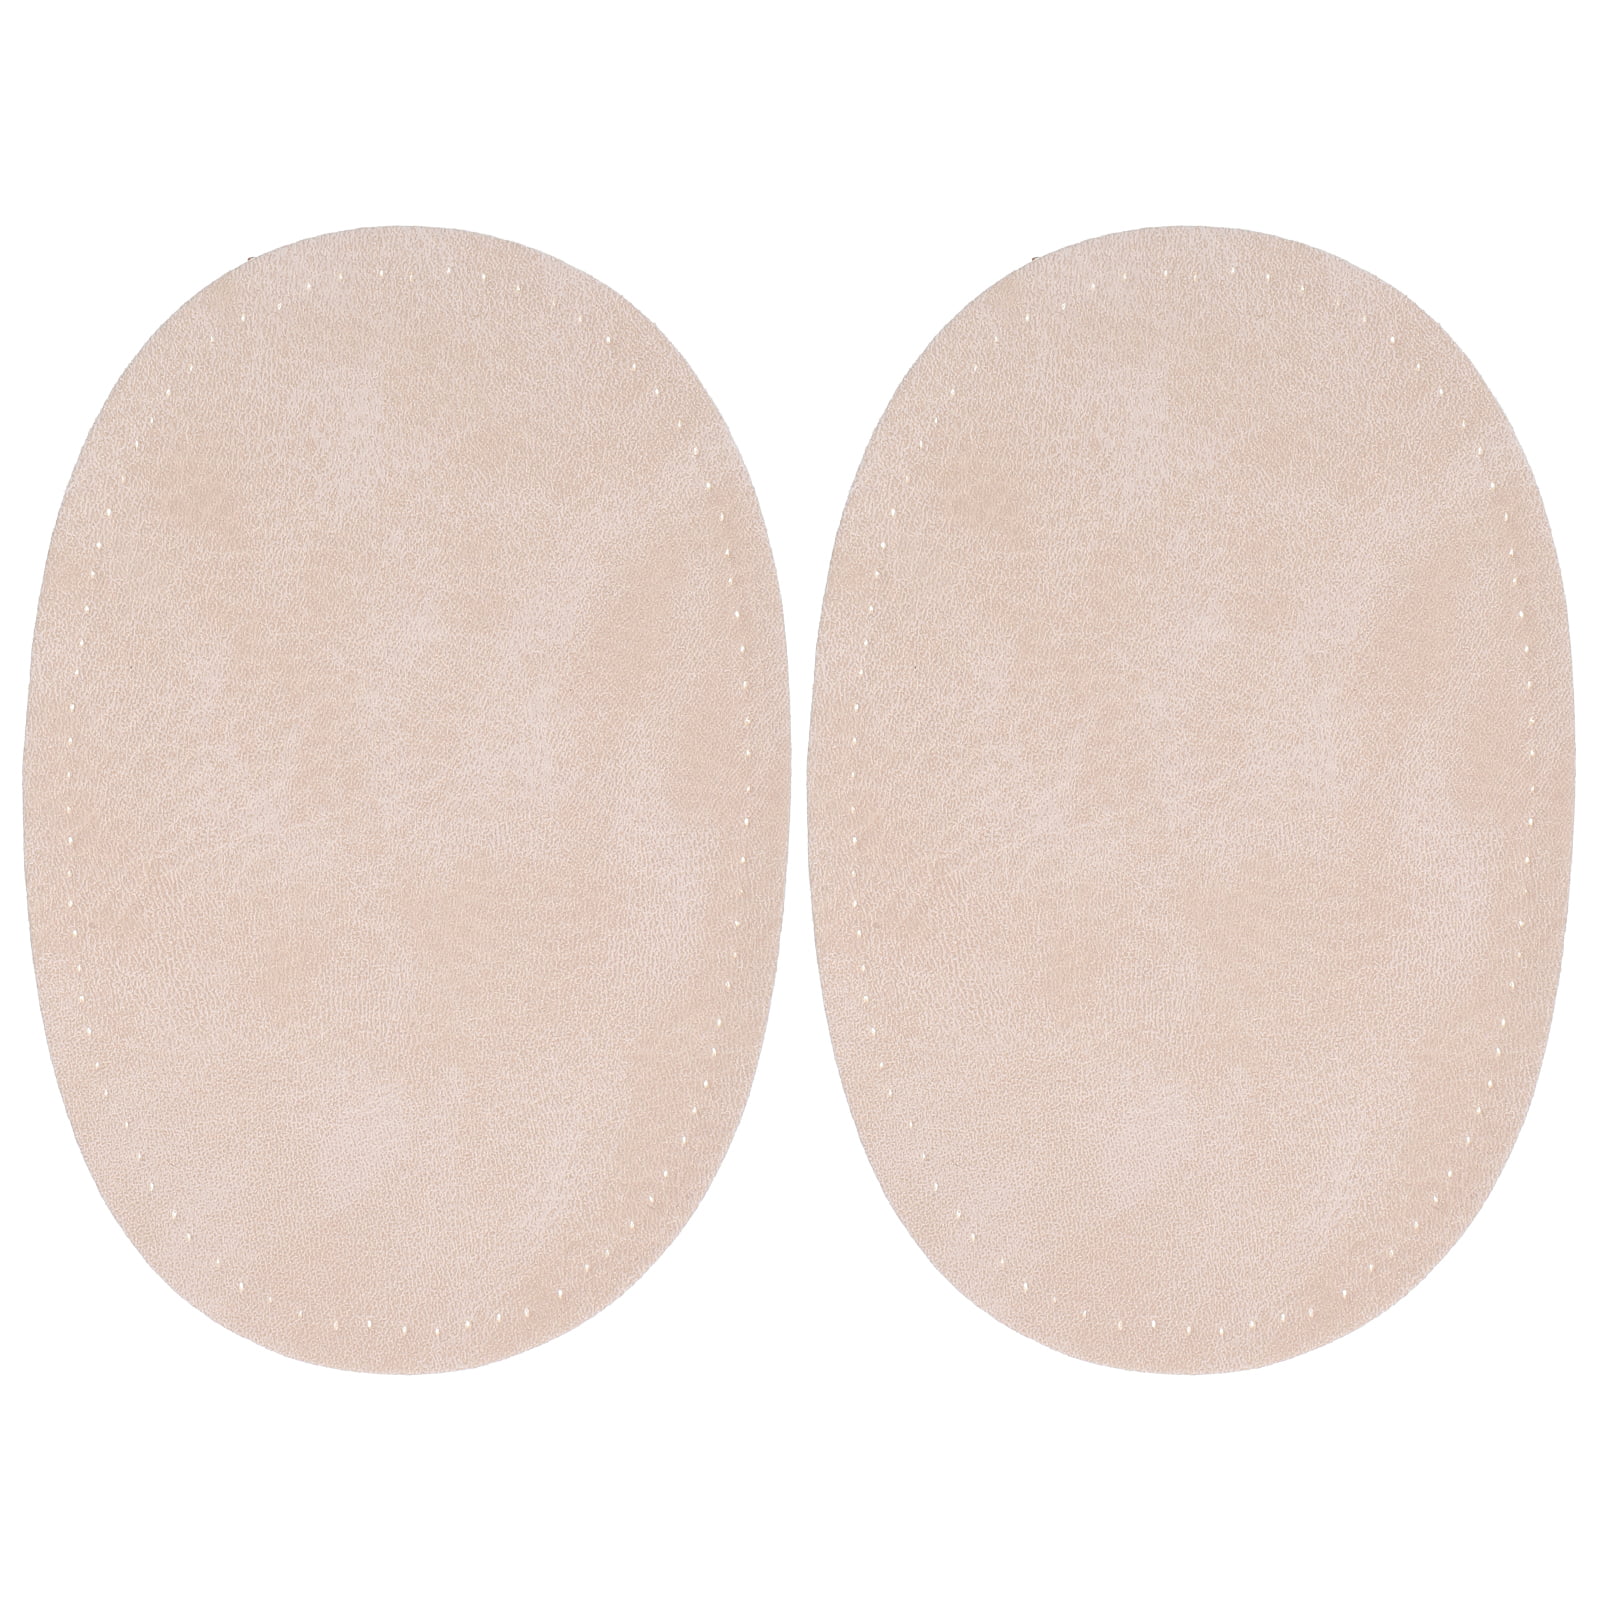  COHEALI 72 Pcs Boob Stickies Elbow Patches DIY Patches